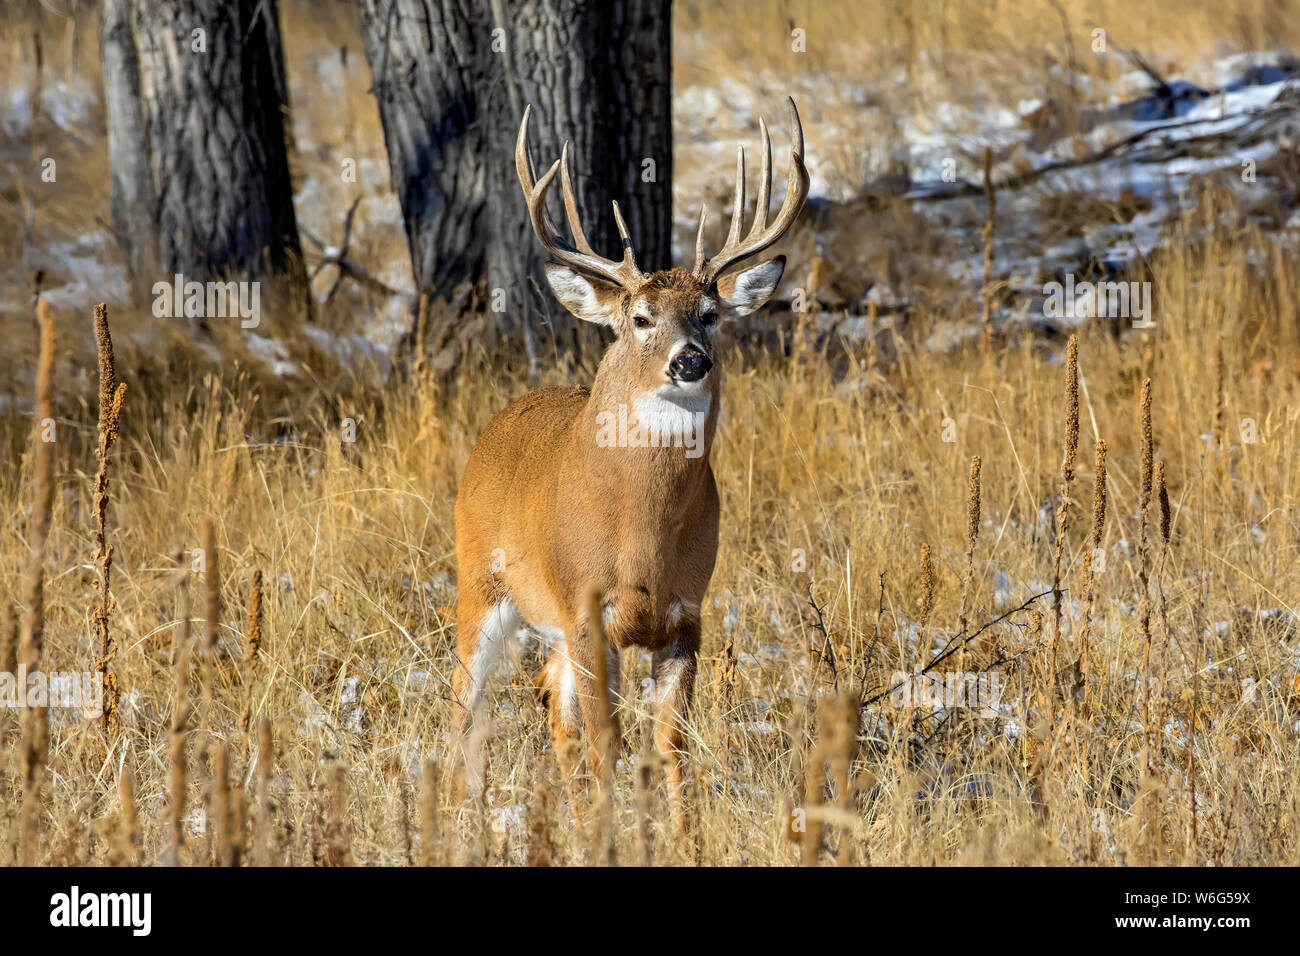 White-tailed deer (Odocoileus virginianus) buck standing in a grass field with traces of snow; Denver, Colorado, United States of America Stock Photo